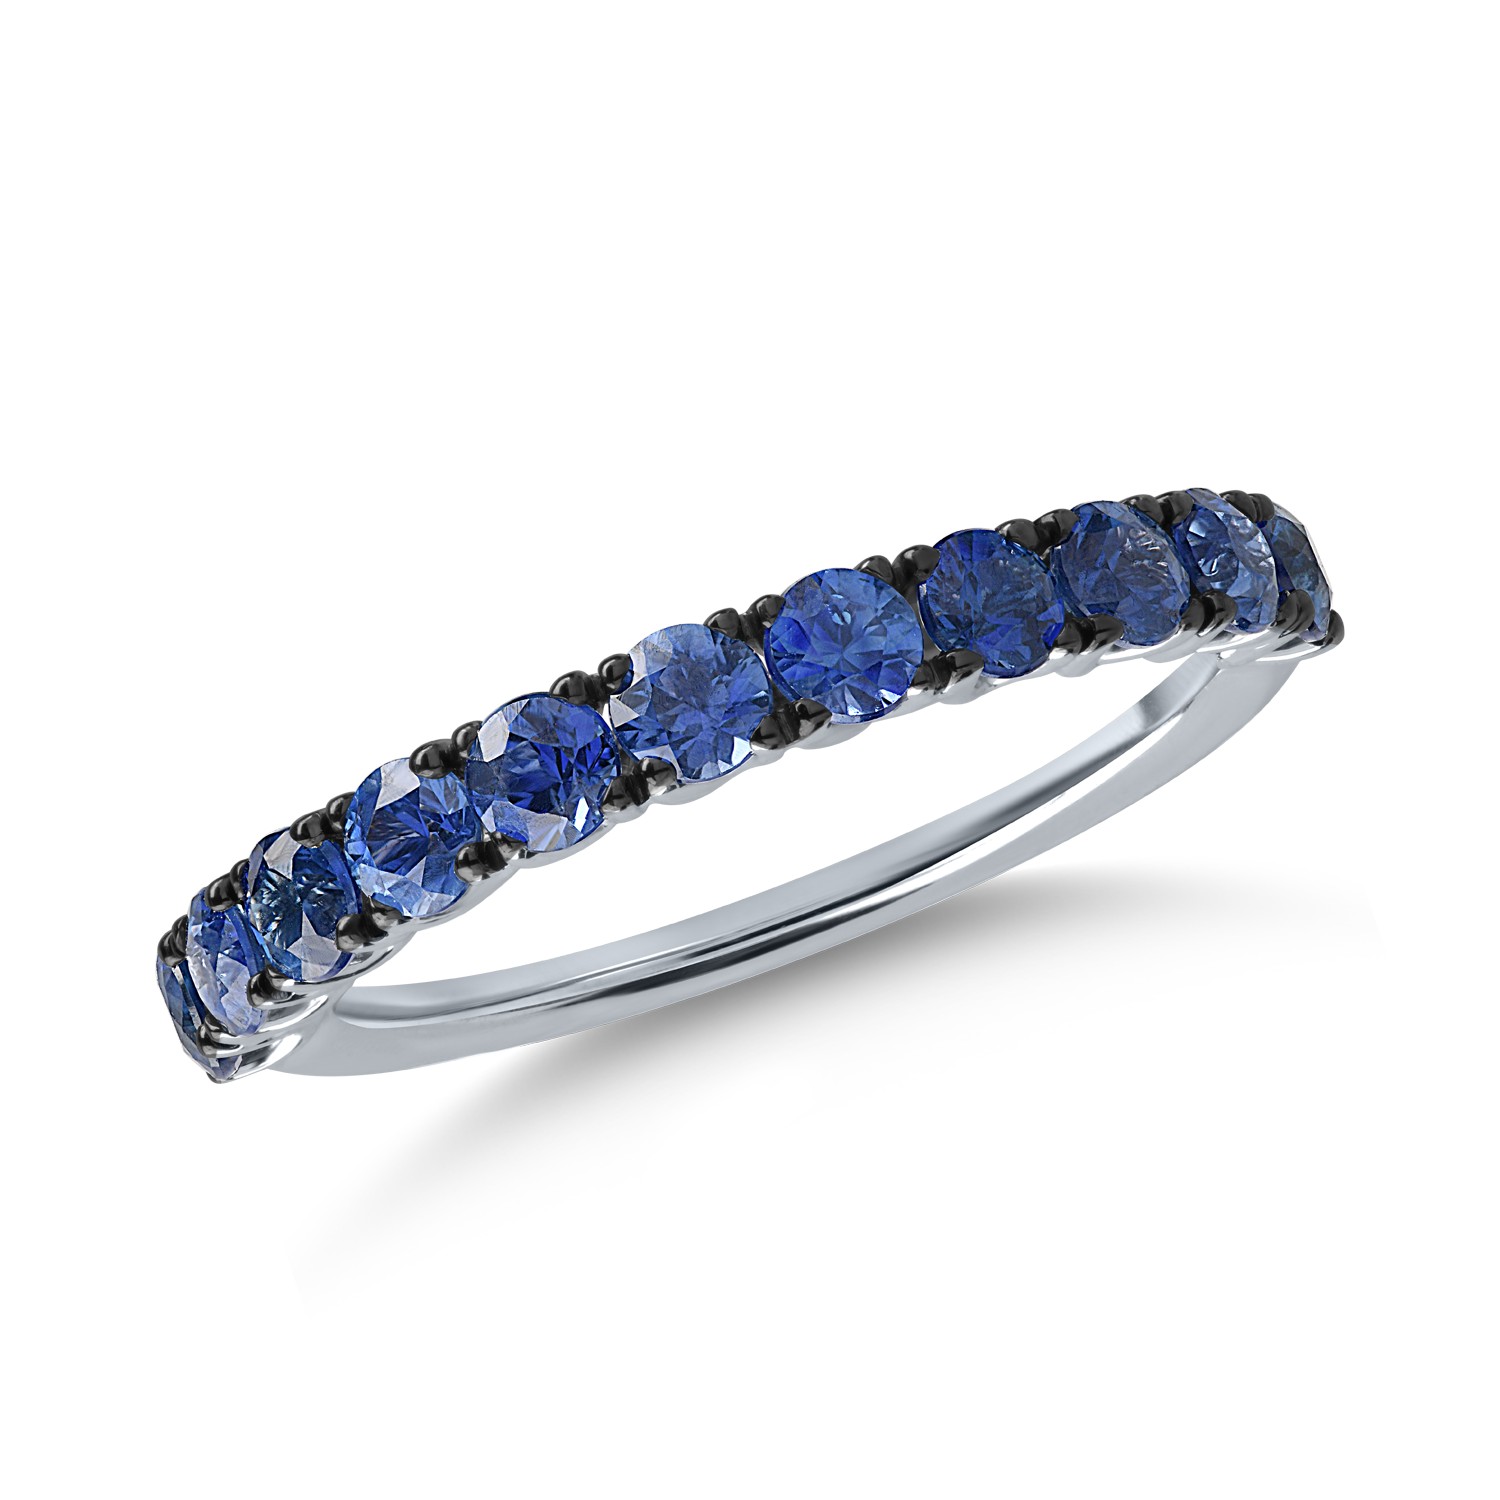 Half eternity ring in white gold with 1.28ct sapphires